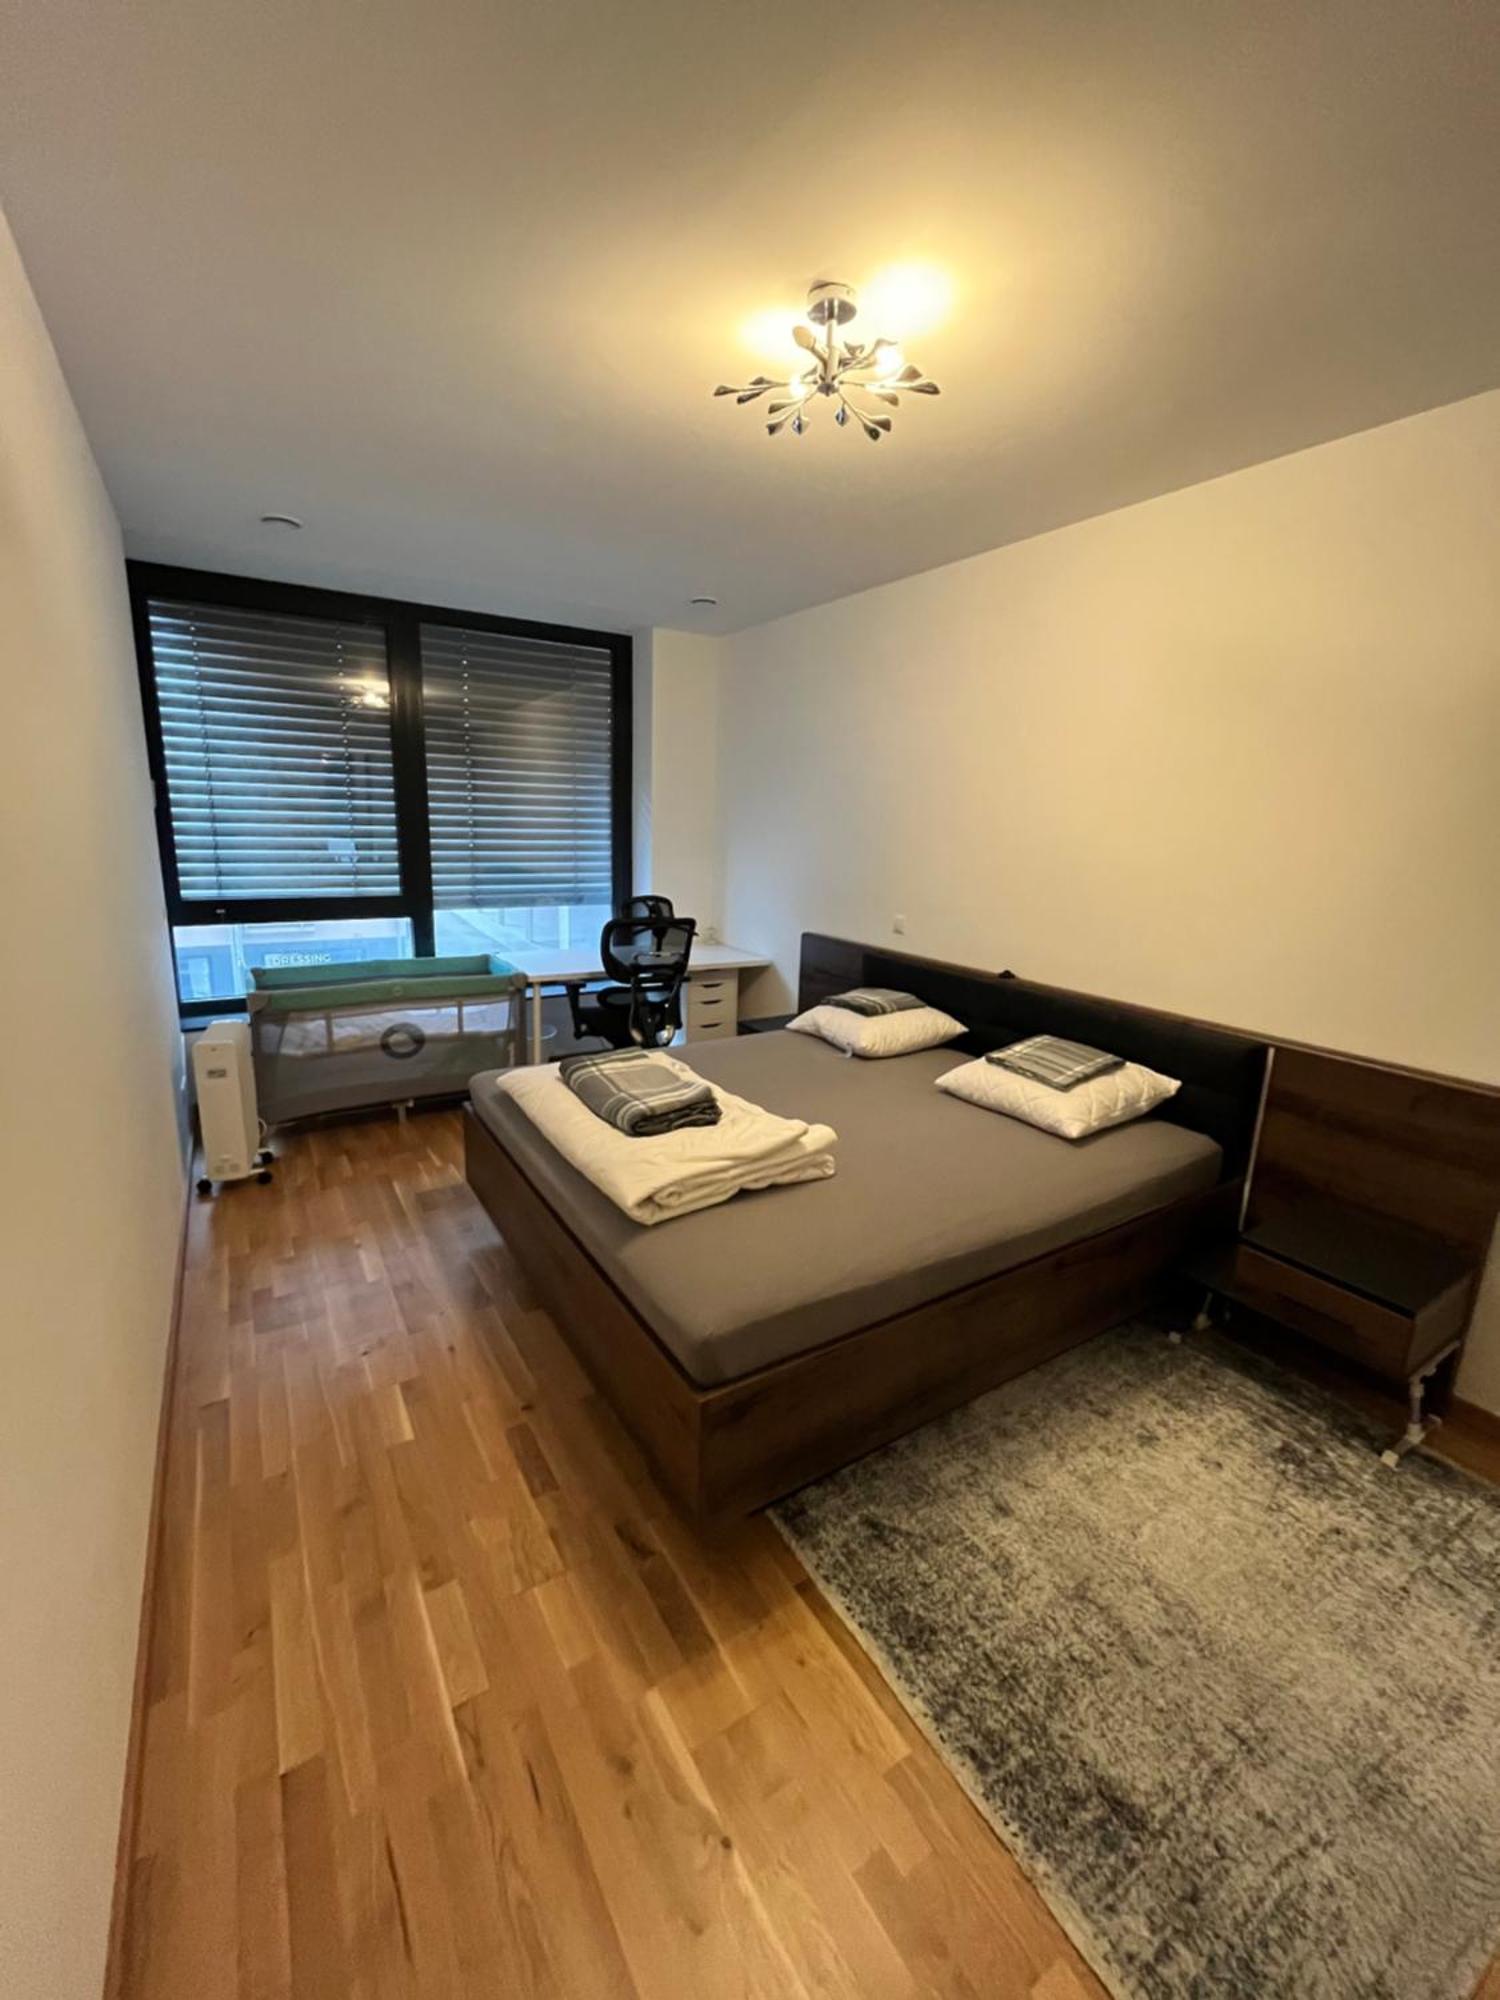 Luxembourg 2 Bedroom Apartment In Gasperich 外观 照片